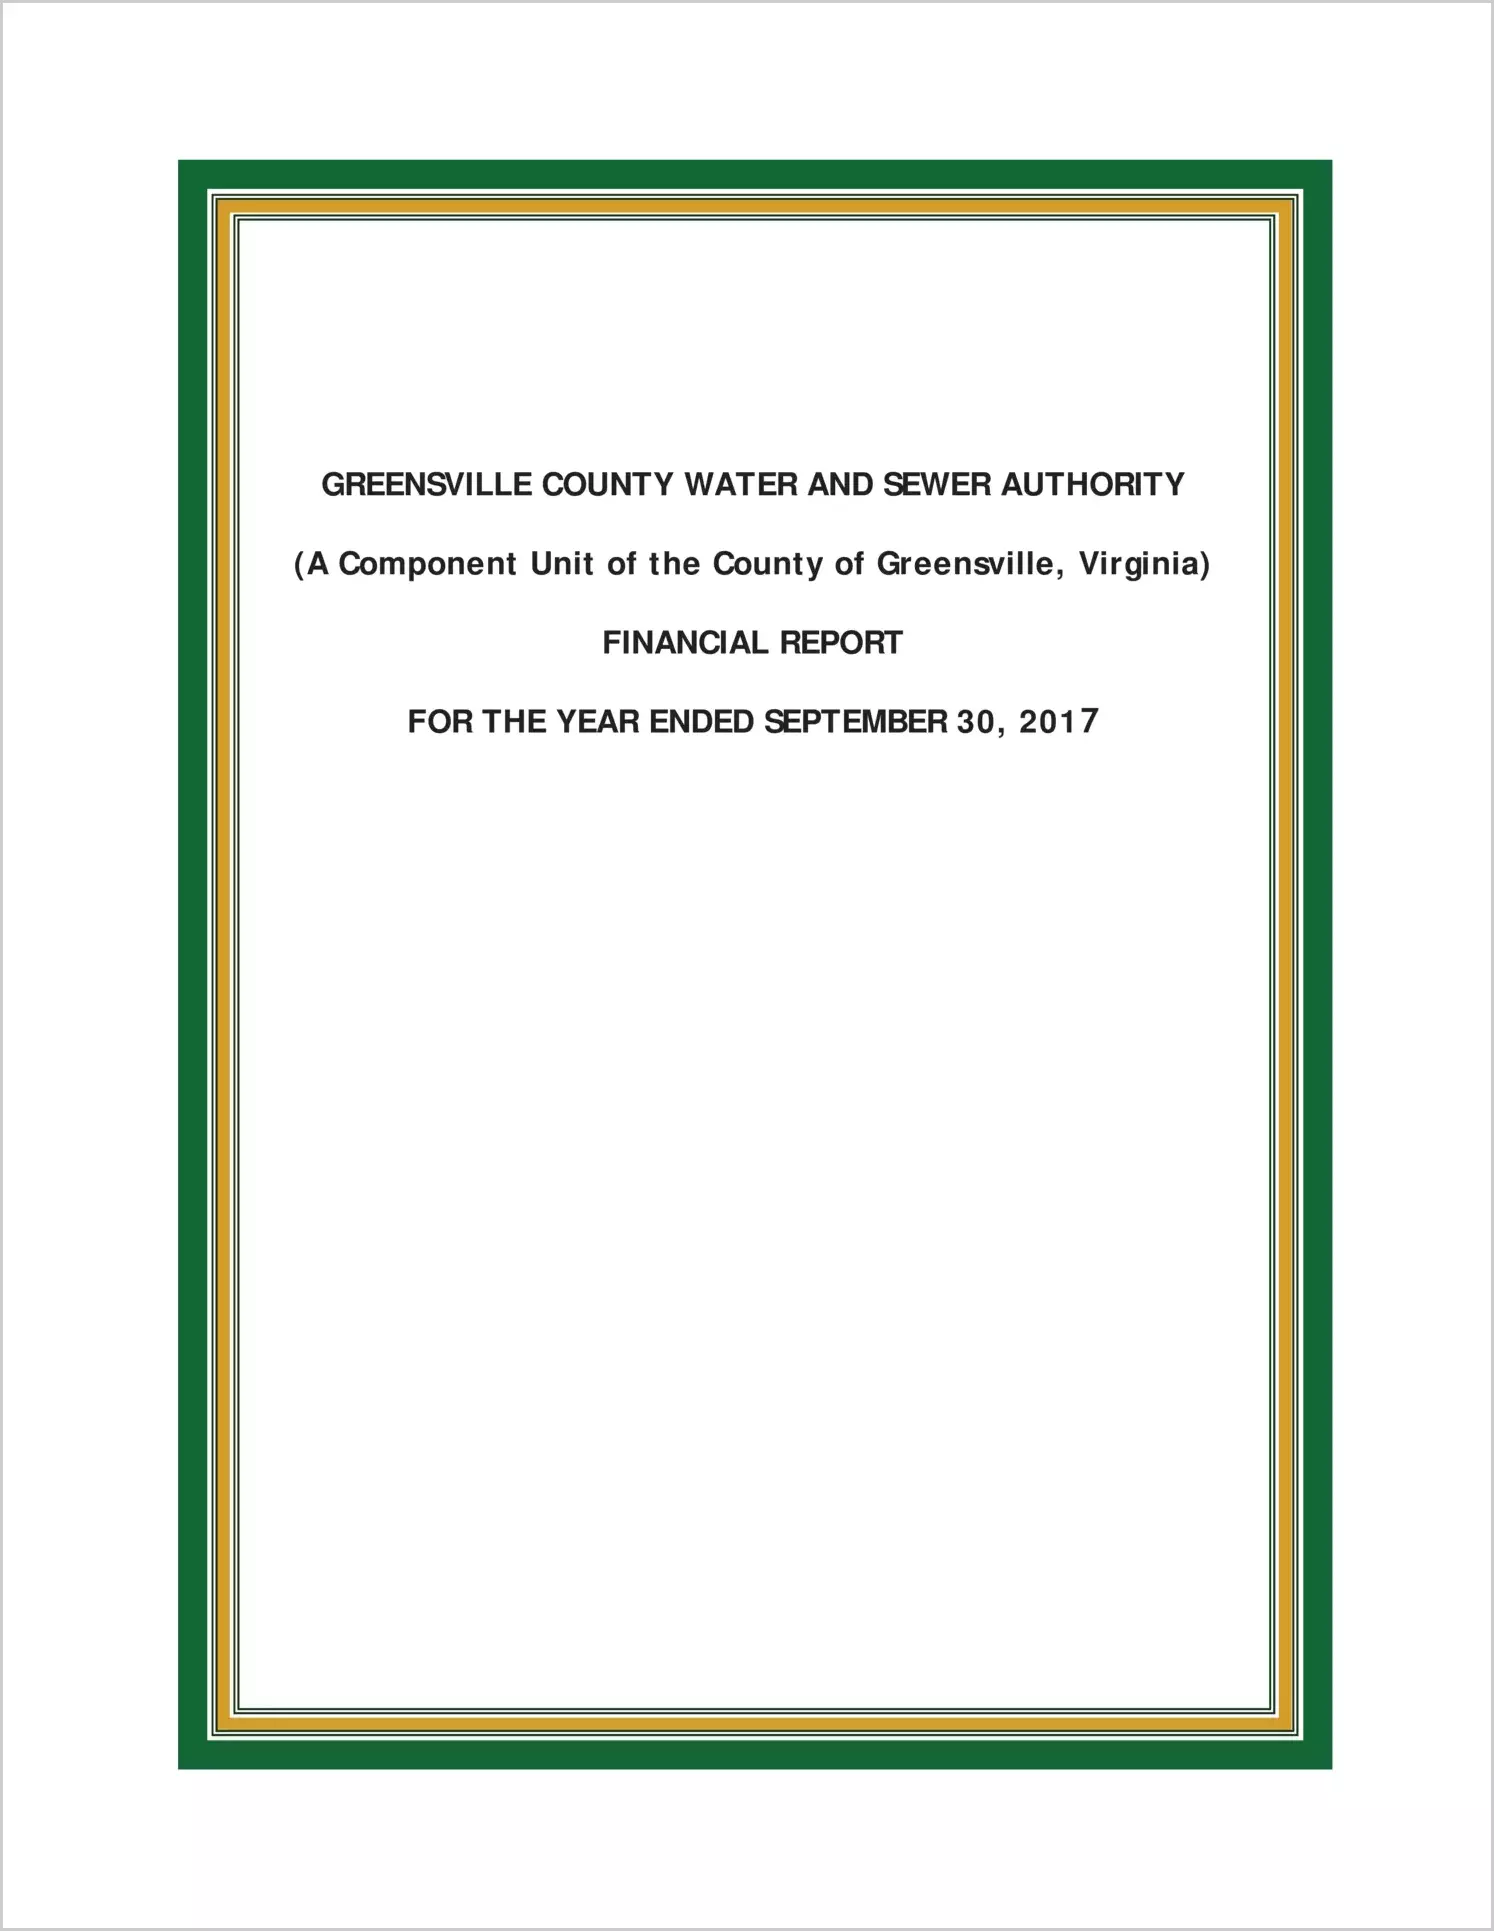 2017 ABC/Other Annual Financial Report  for Greensville County Water and Sewer Authority